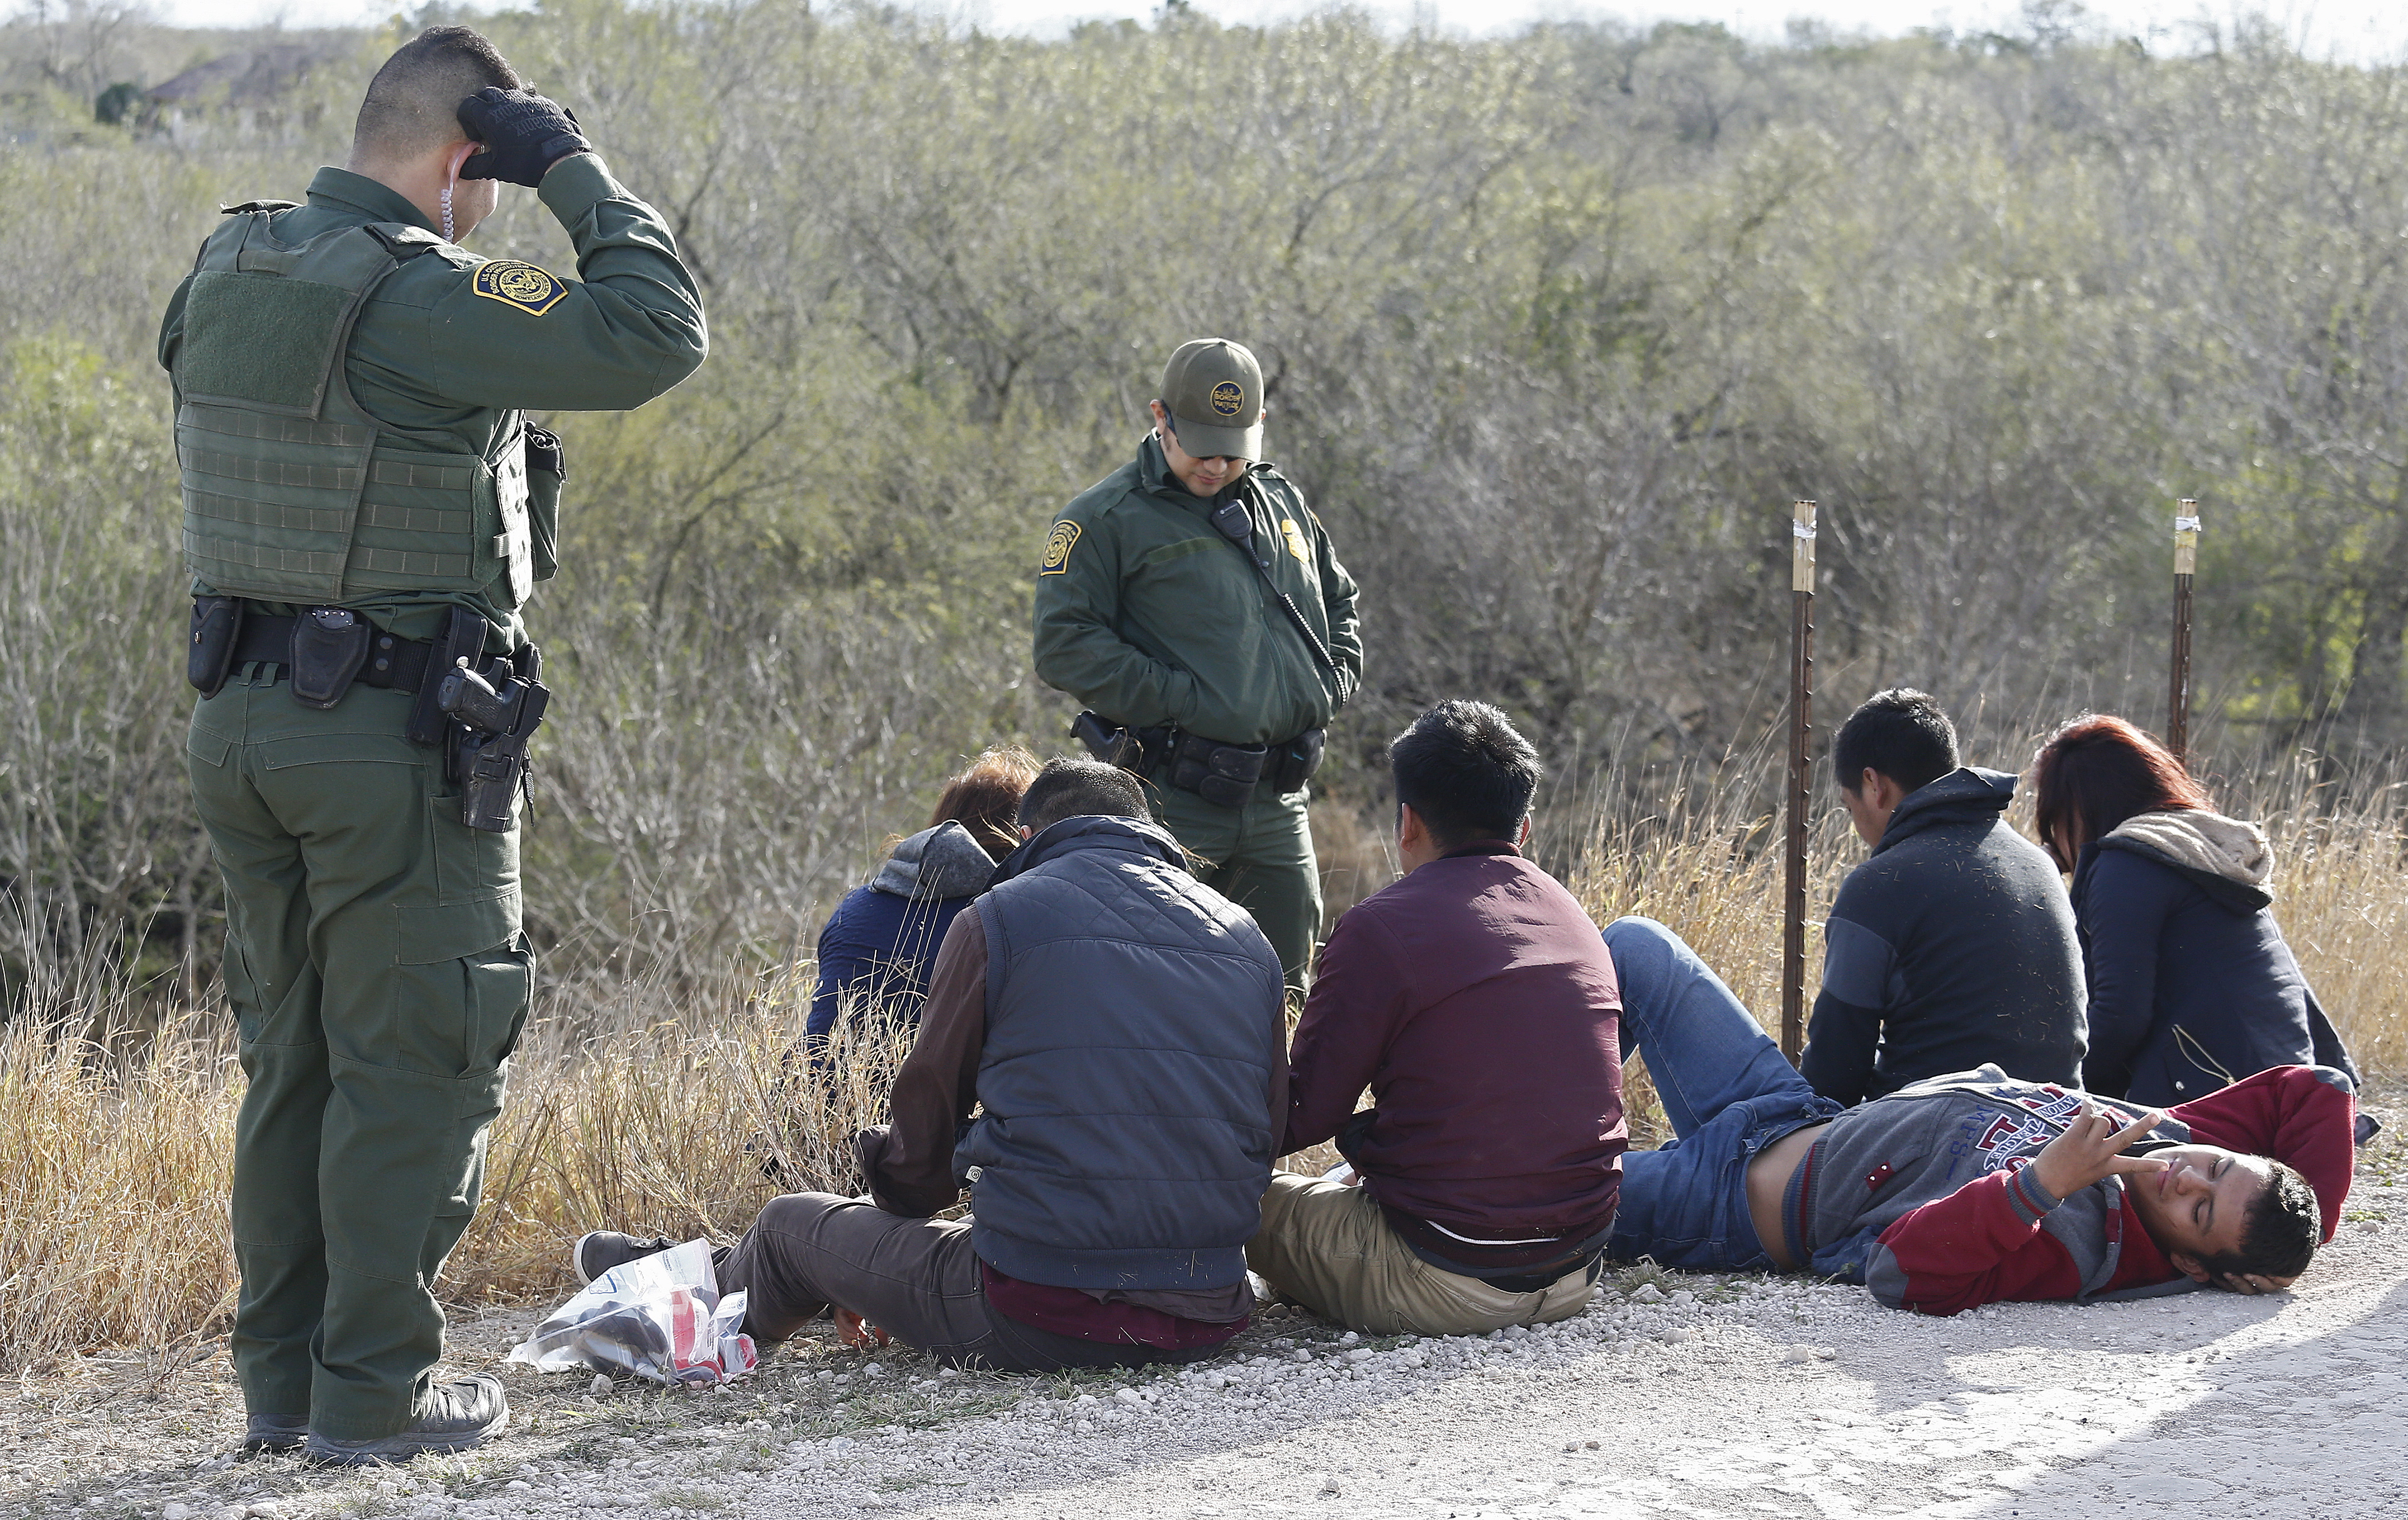 epa07313163 United States Border Patrol agents process people suspected of crossing the Rio Grande River to enter the United States illegally near McAllen, Texas, USA, 23 January 2019. The nearly two thousand mile United States Mexico border is the most frequently crossed international border in the world. According to reports, the nearly two thousand mile United States Mexico border is the most frequently crossed international border in the world.  EPA/LARRY W. SMITH